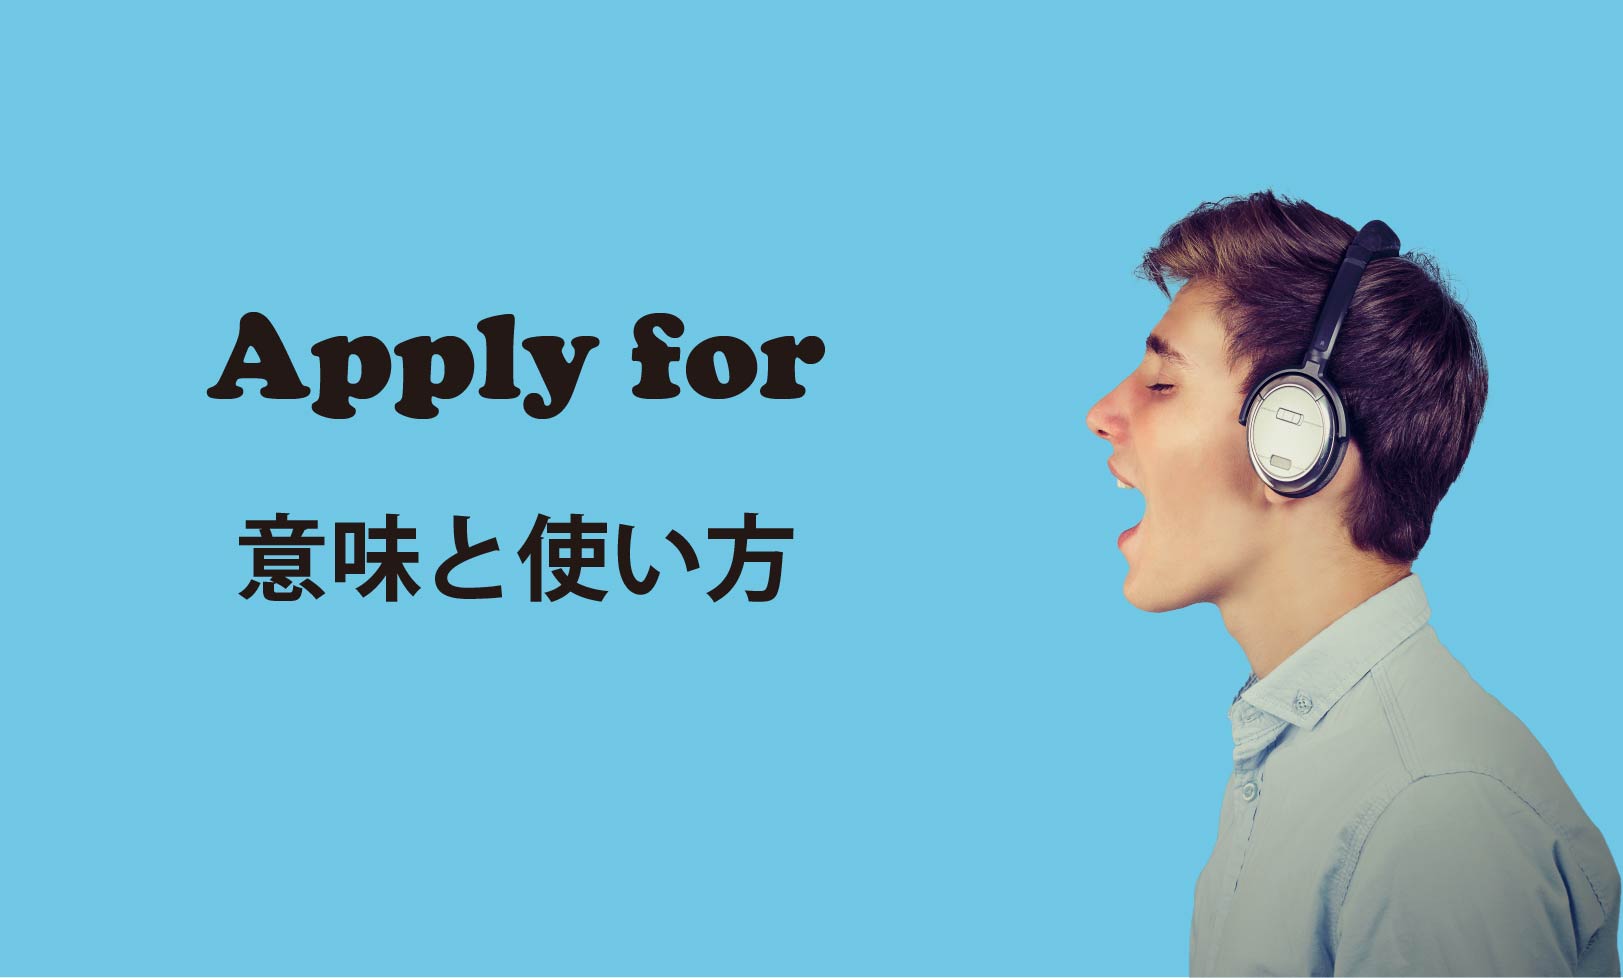 apply for ブログ　表紙